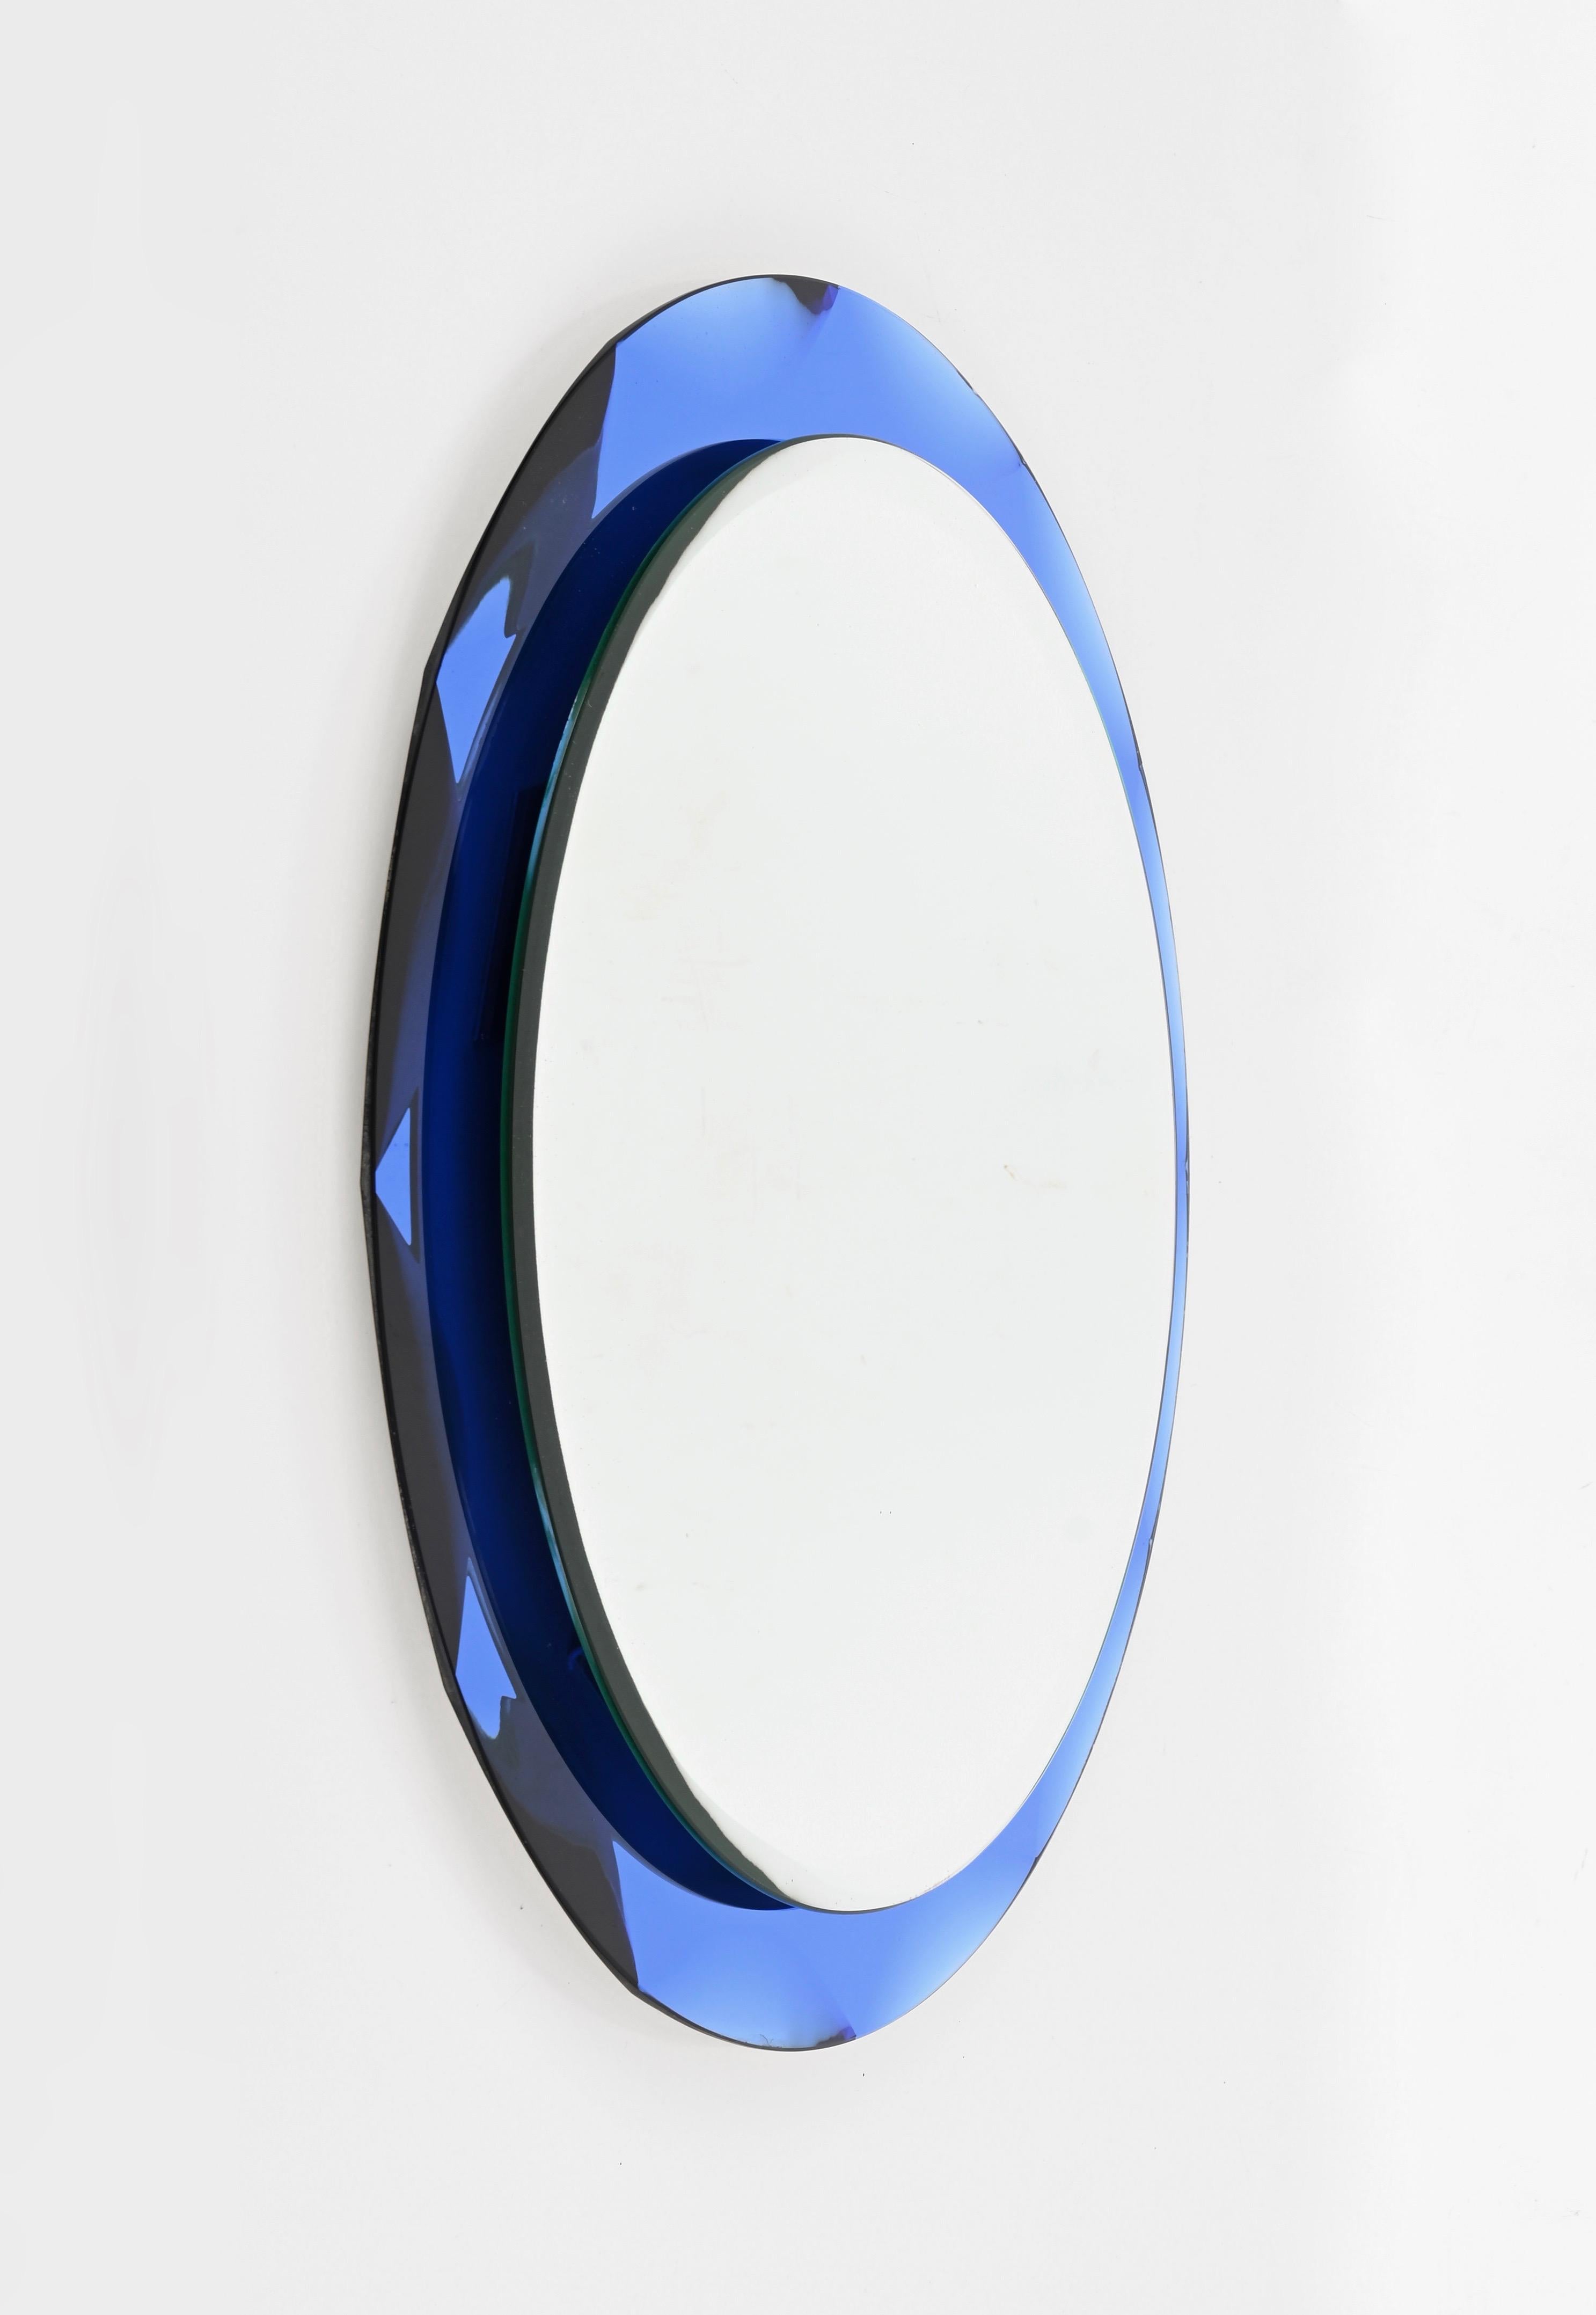 Mid-20th Century Midcentury Round Blue Diamond Double Beveled Mirror by Galvorame, Italy 1970s For Sale